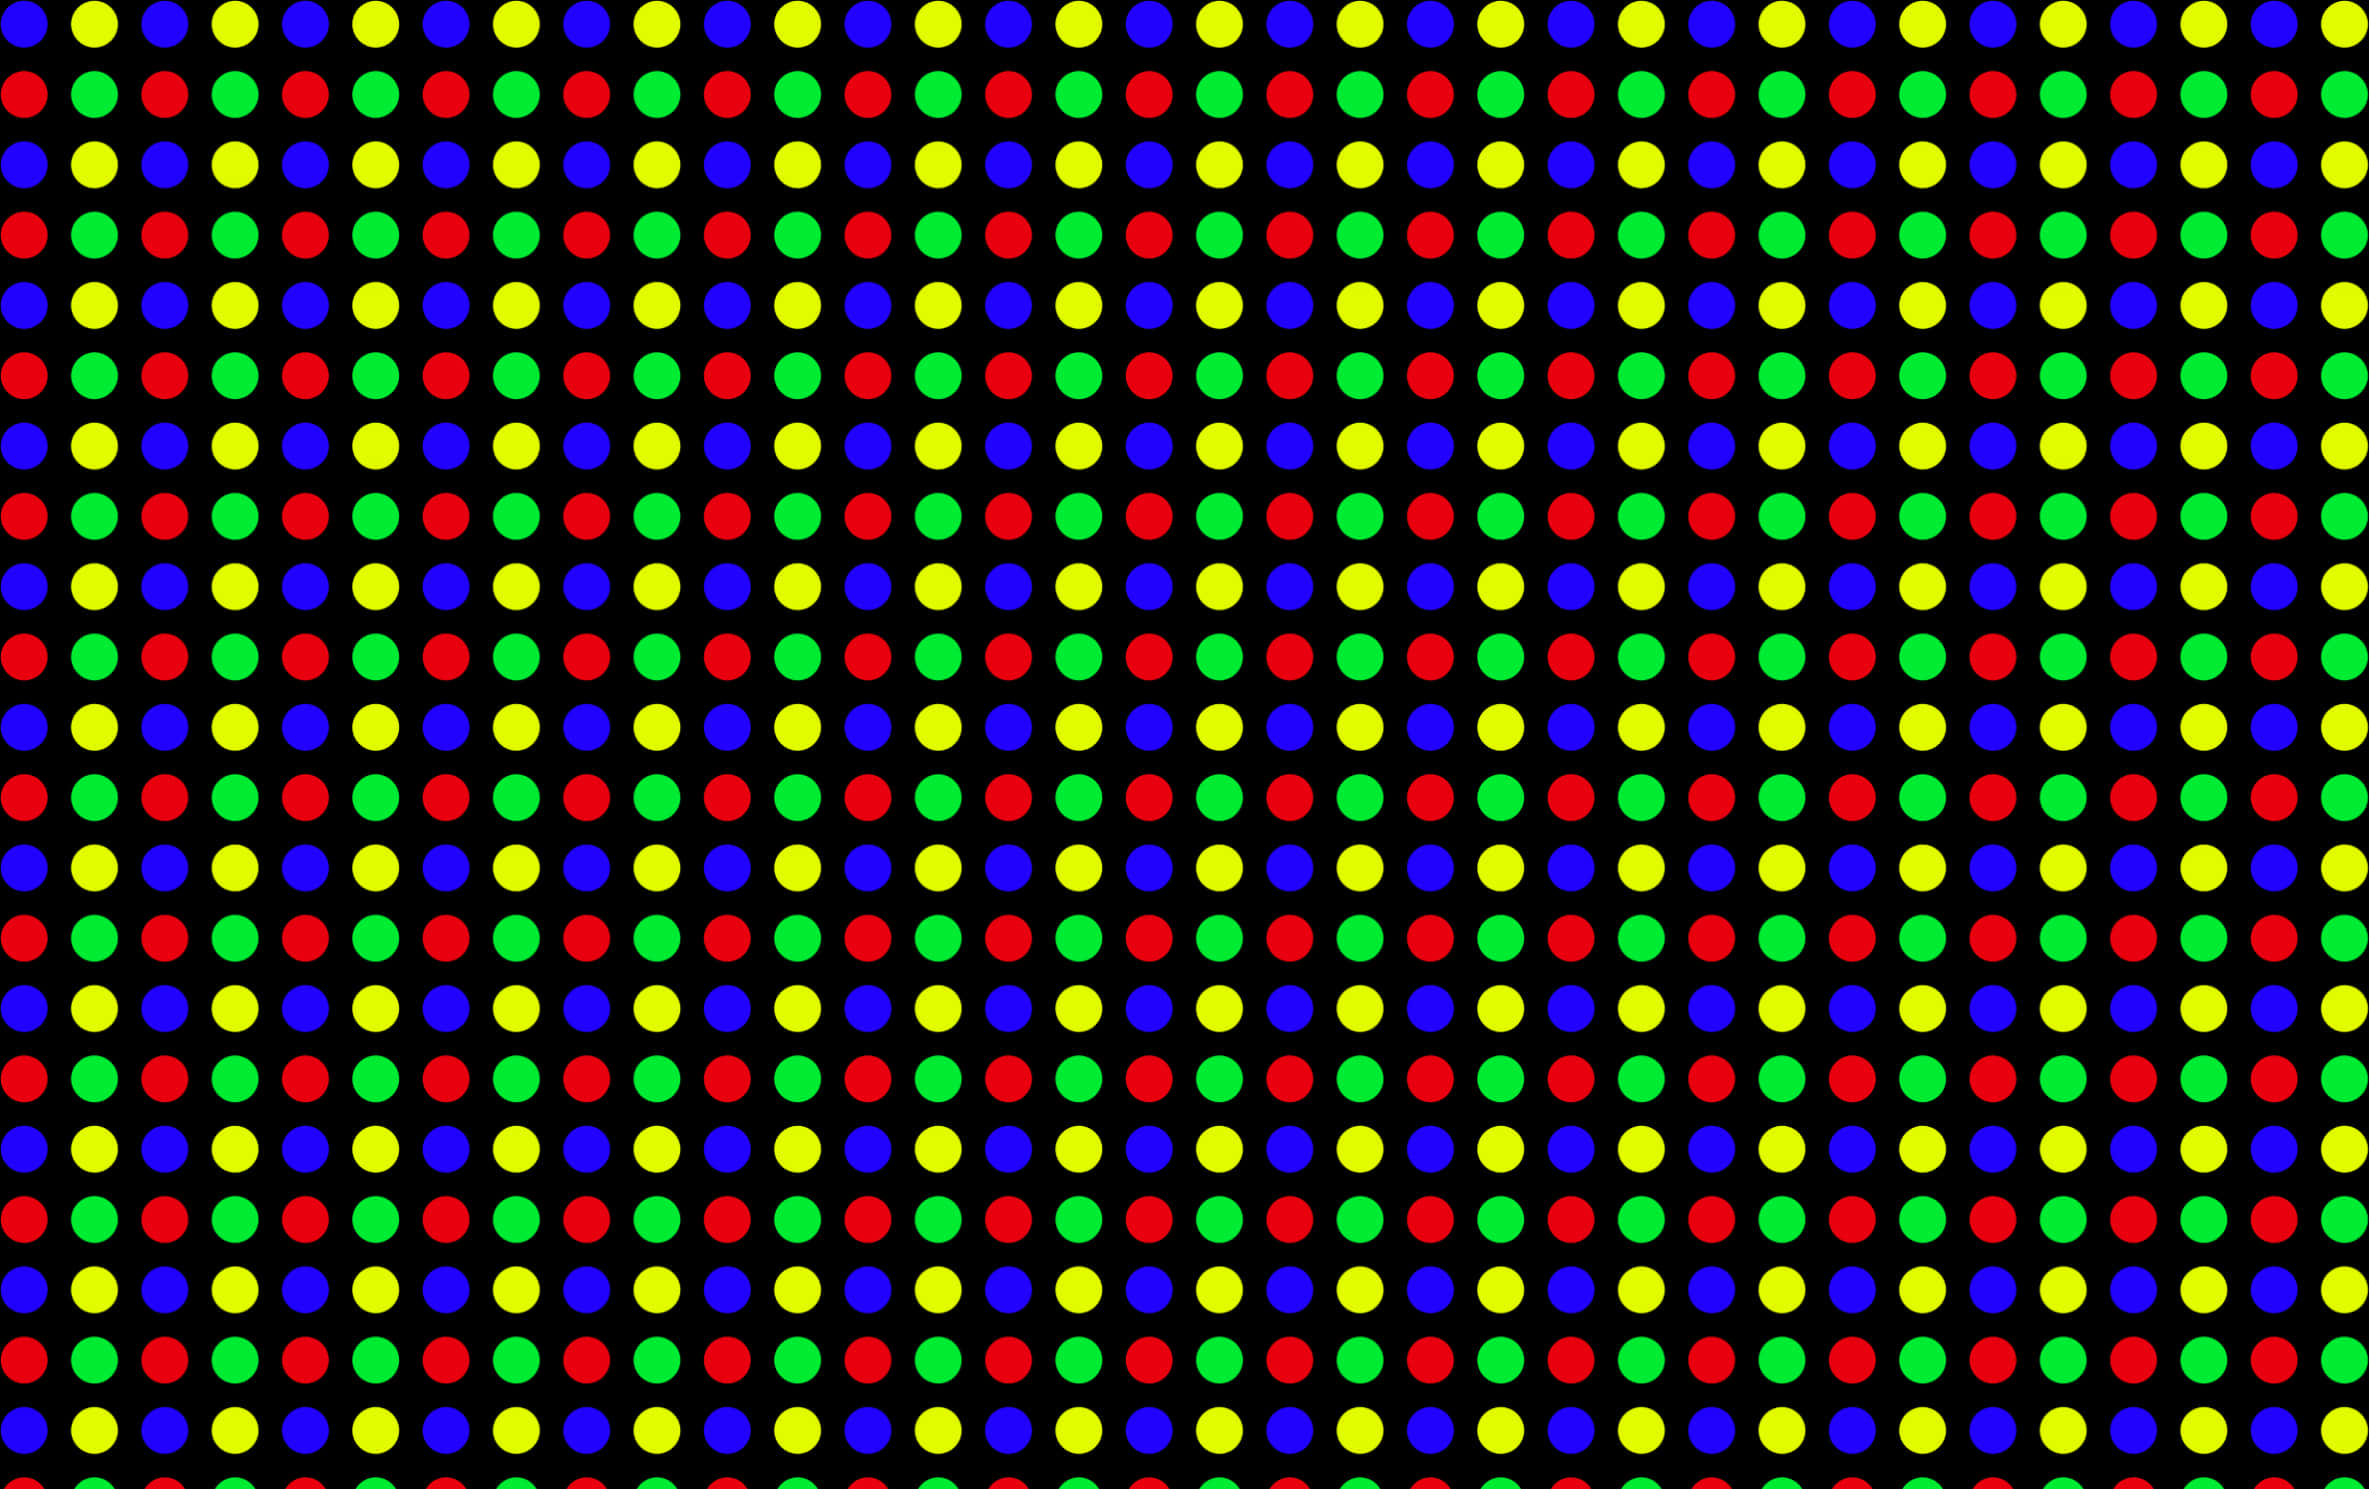 A Colorful Dots On A Black Background